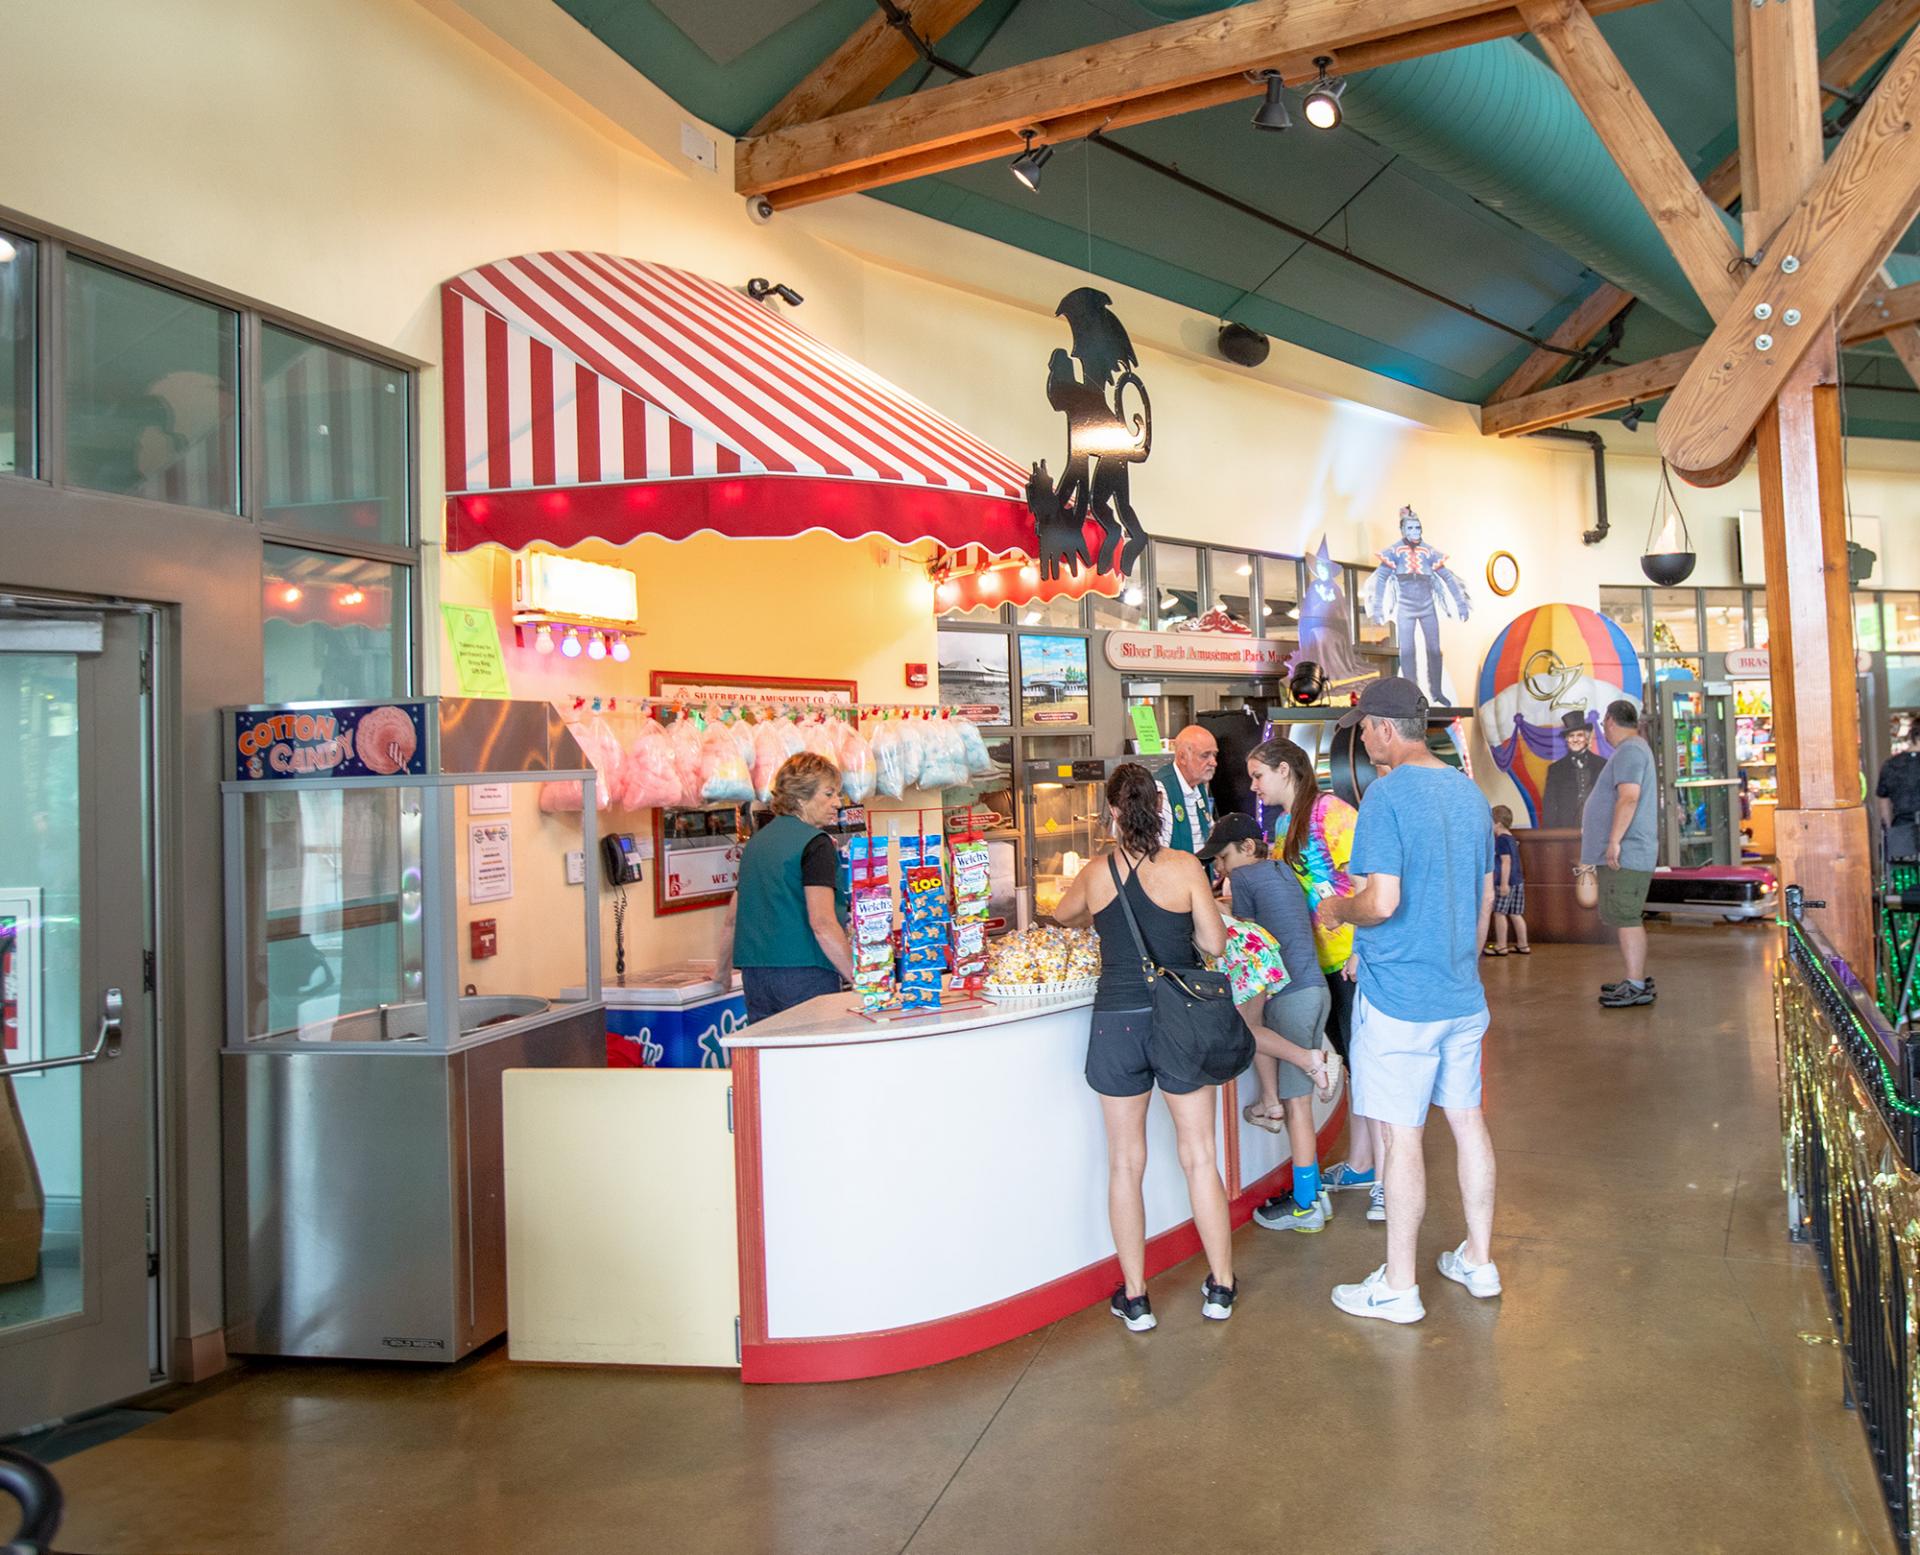 Refreshment stand at the Silver Beach Carousel